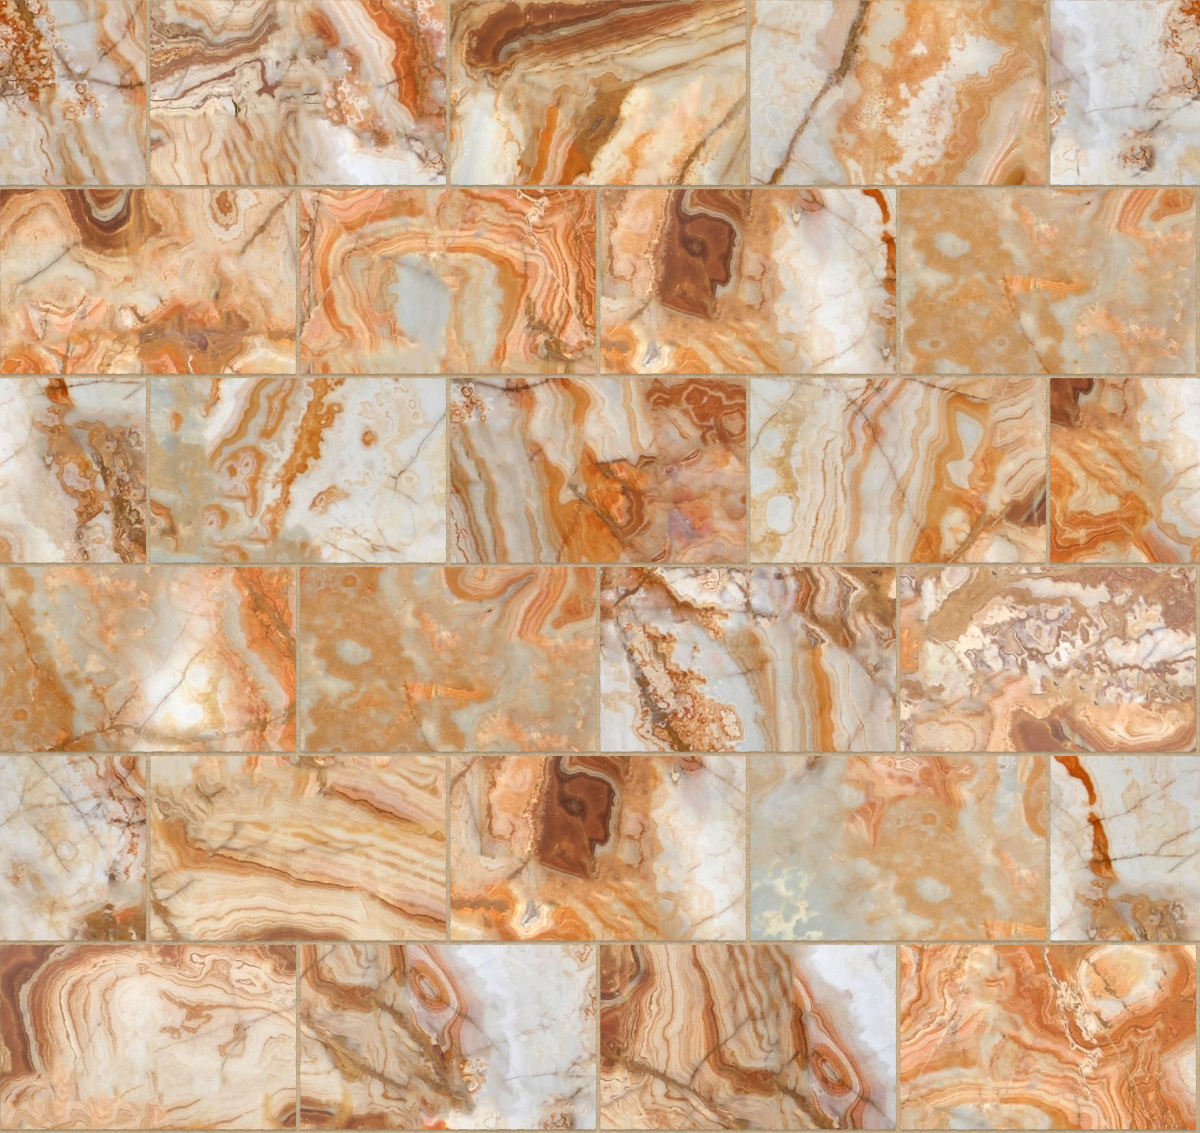 A seamless stone texture with orange marble blocks arranged in a Stretcher pattern